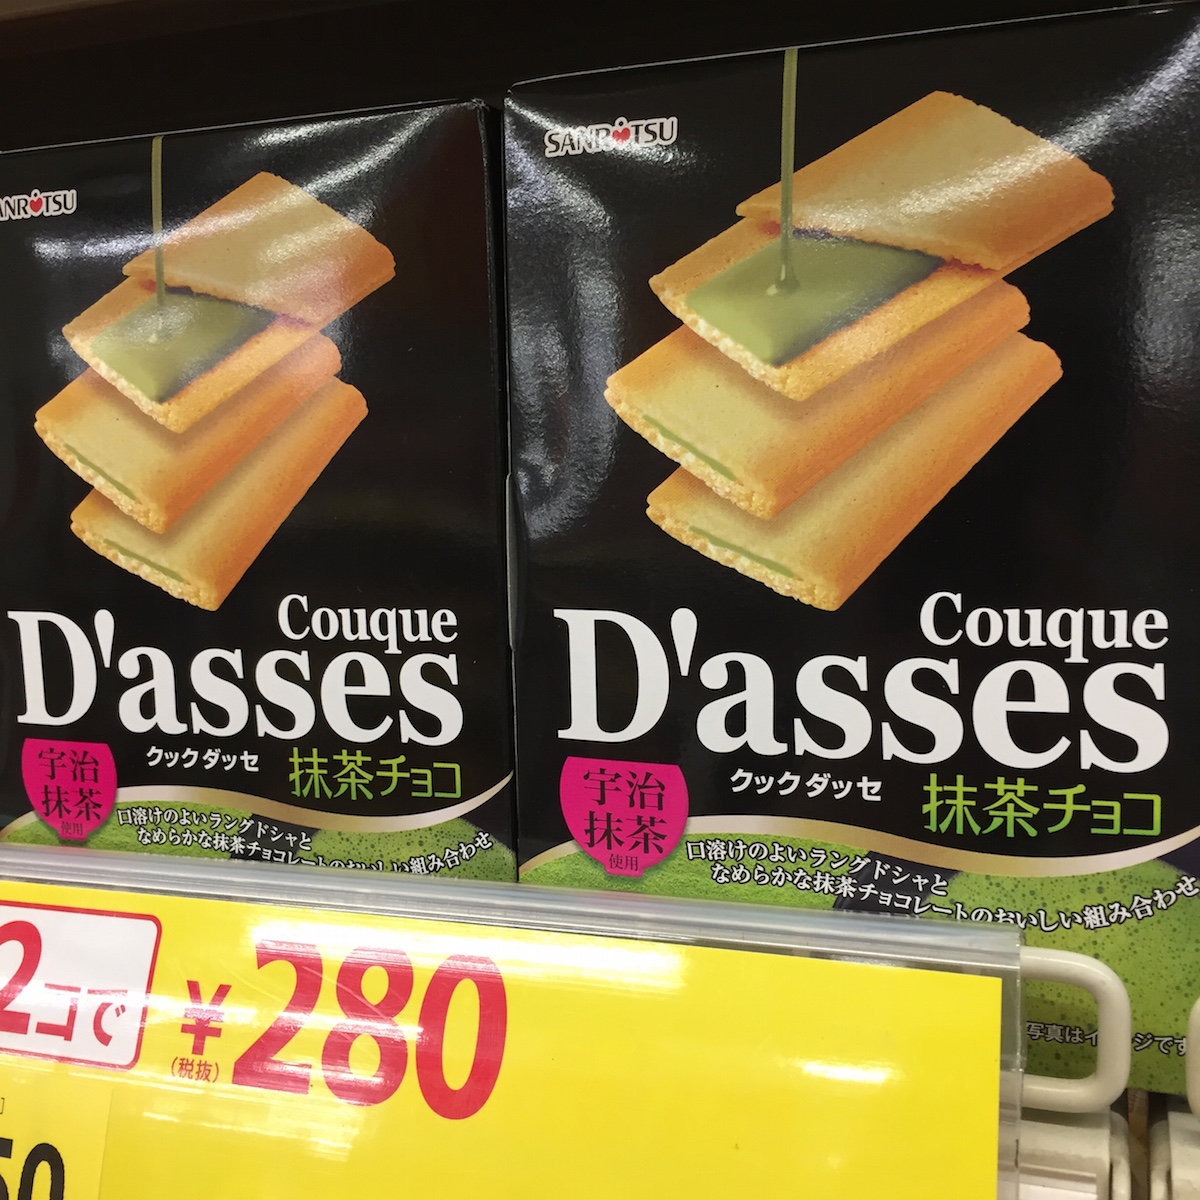 These Japanese Product Names Are So Bad They're Good – Wowsabi